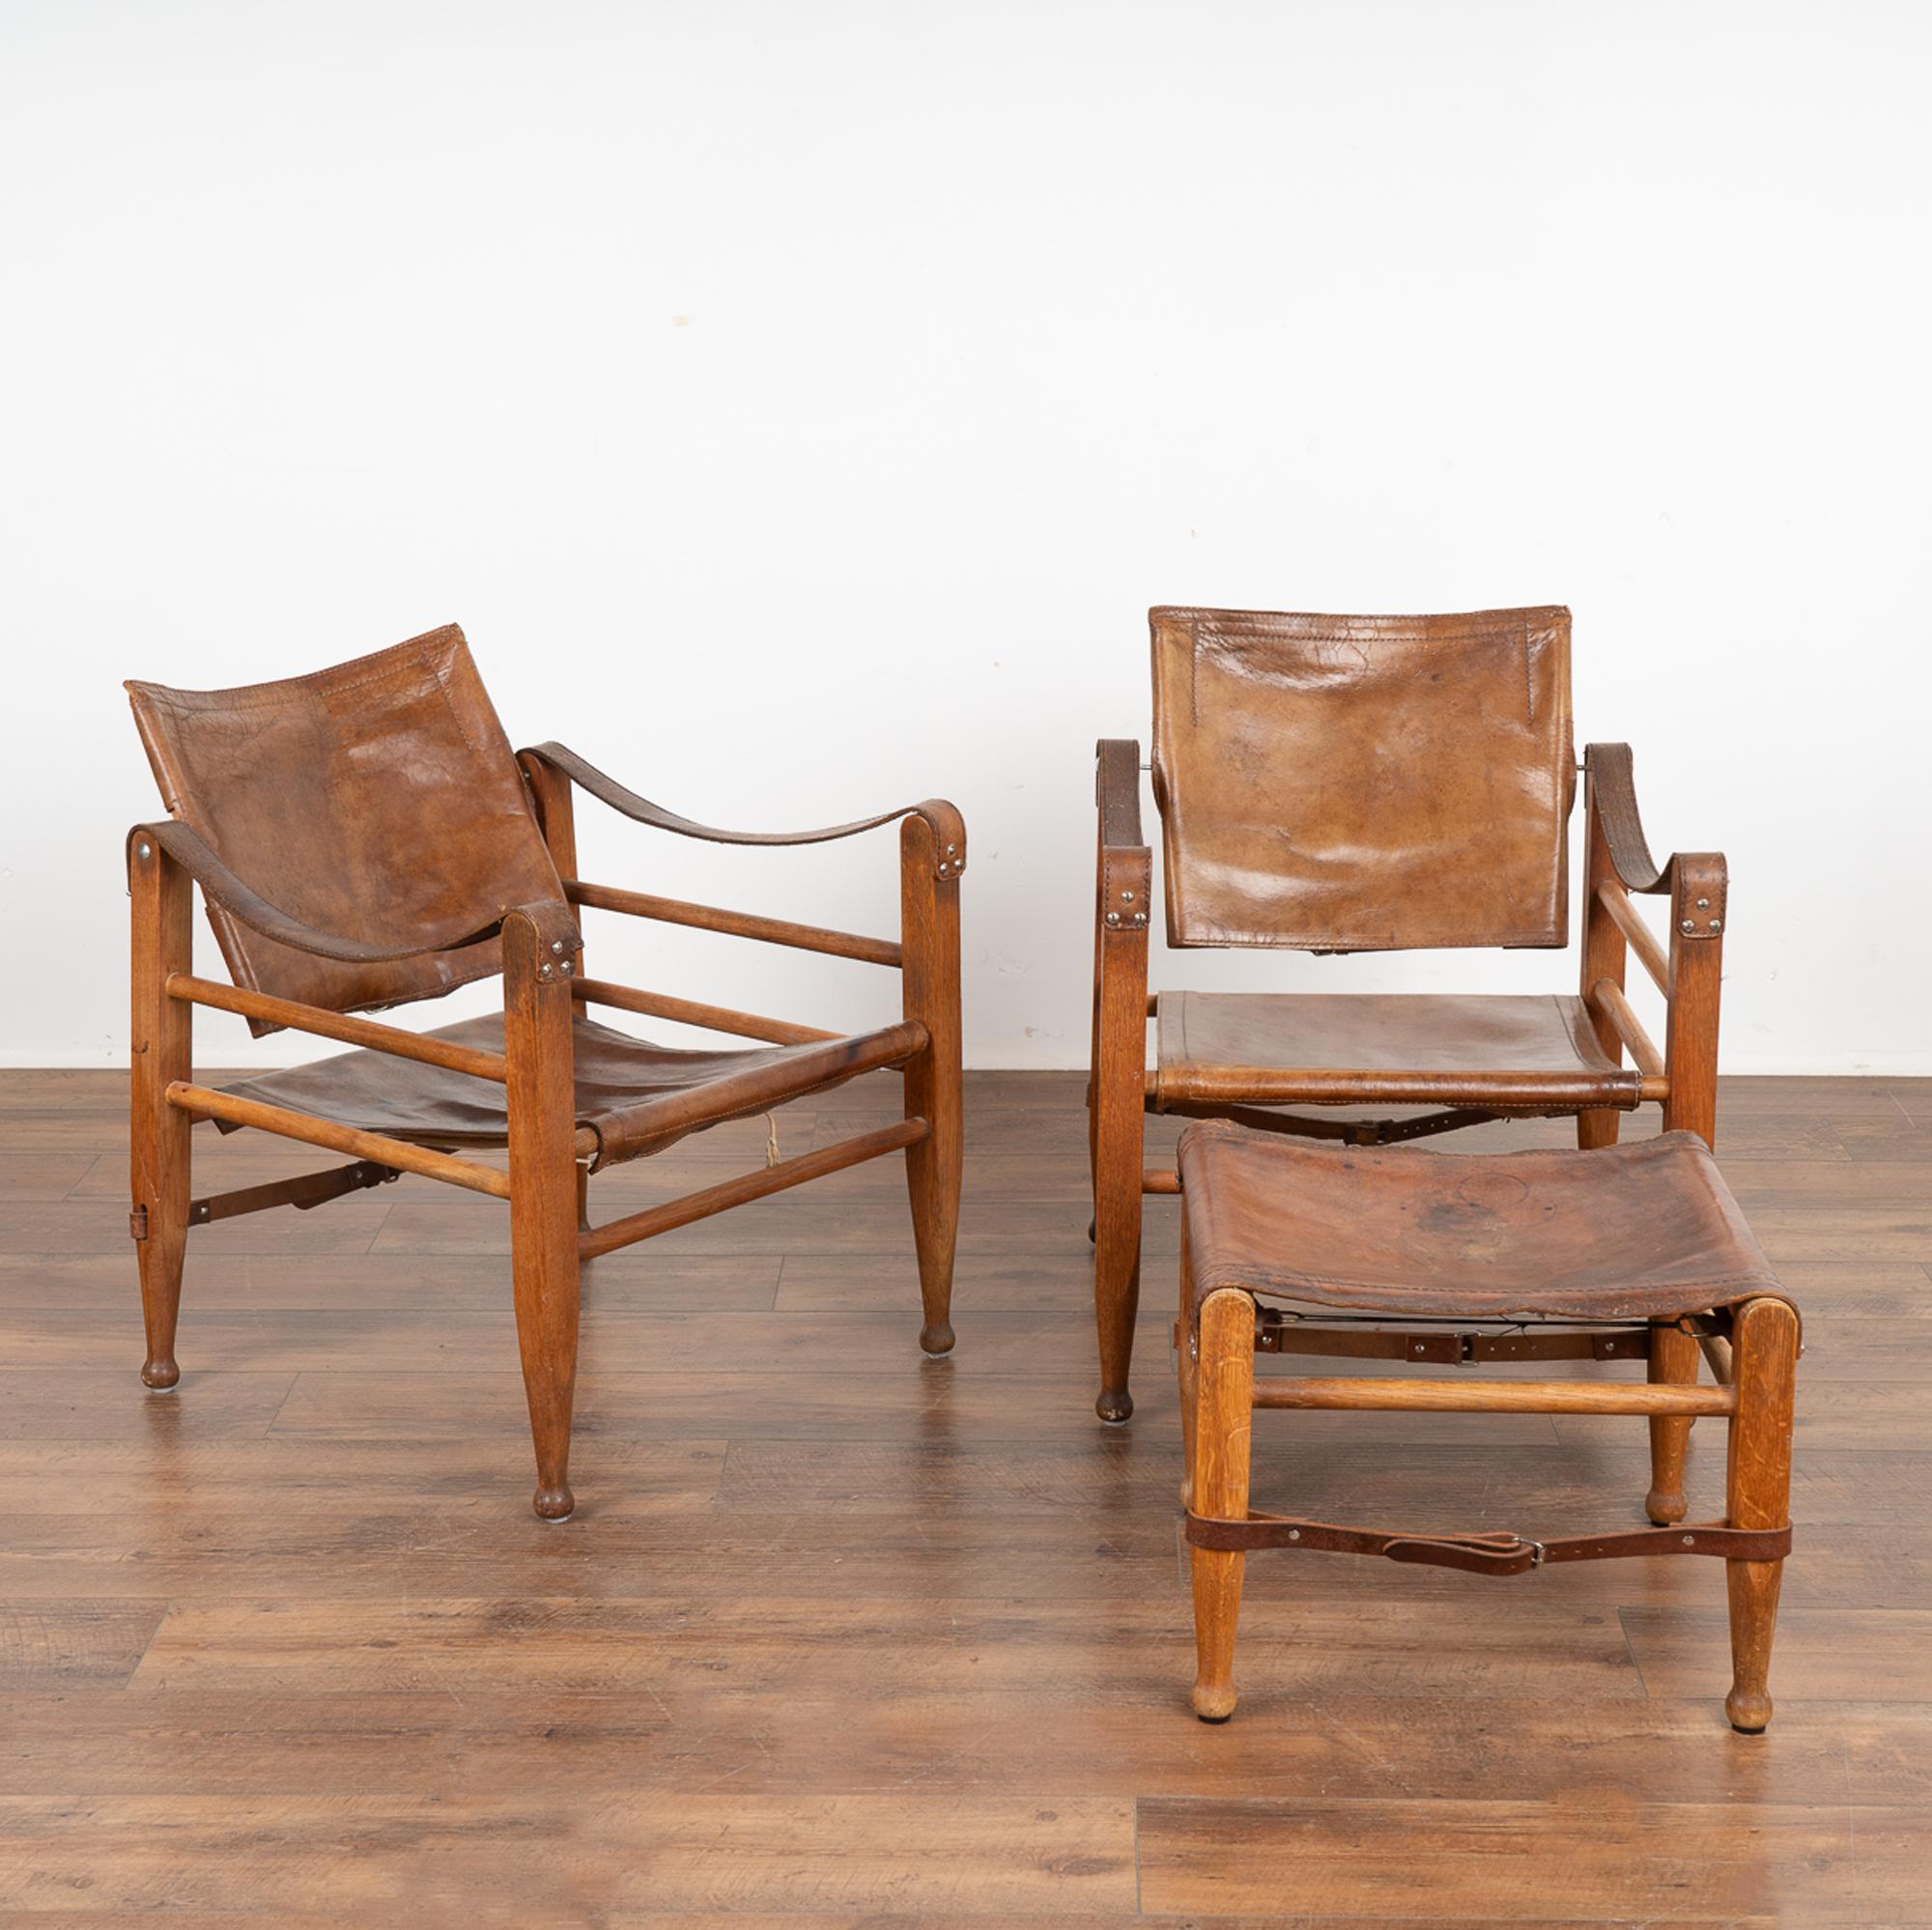 Pair of Mid Century modern brown leather safari chairs and ottoman from Denmark.
Leather seat, swing back and arm rests all set on hard wood frame.
Sold in vintage used condition, leather shows typical age-related wear with stains,crackling, wear